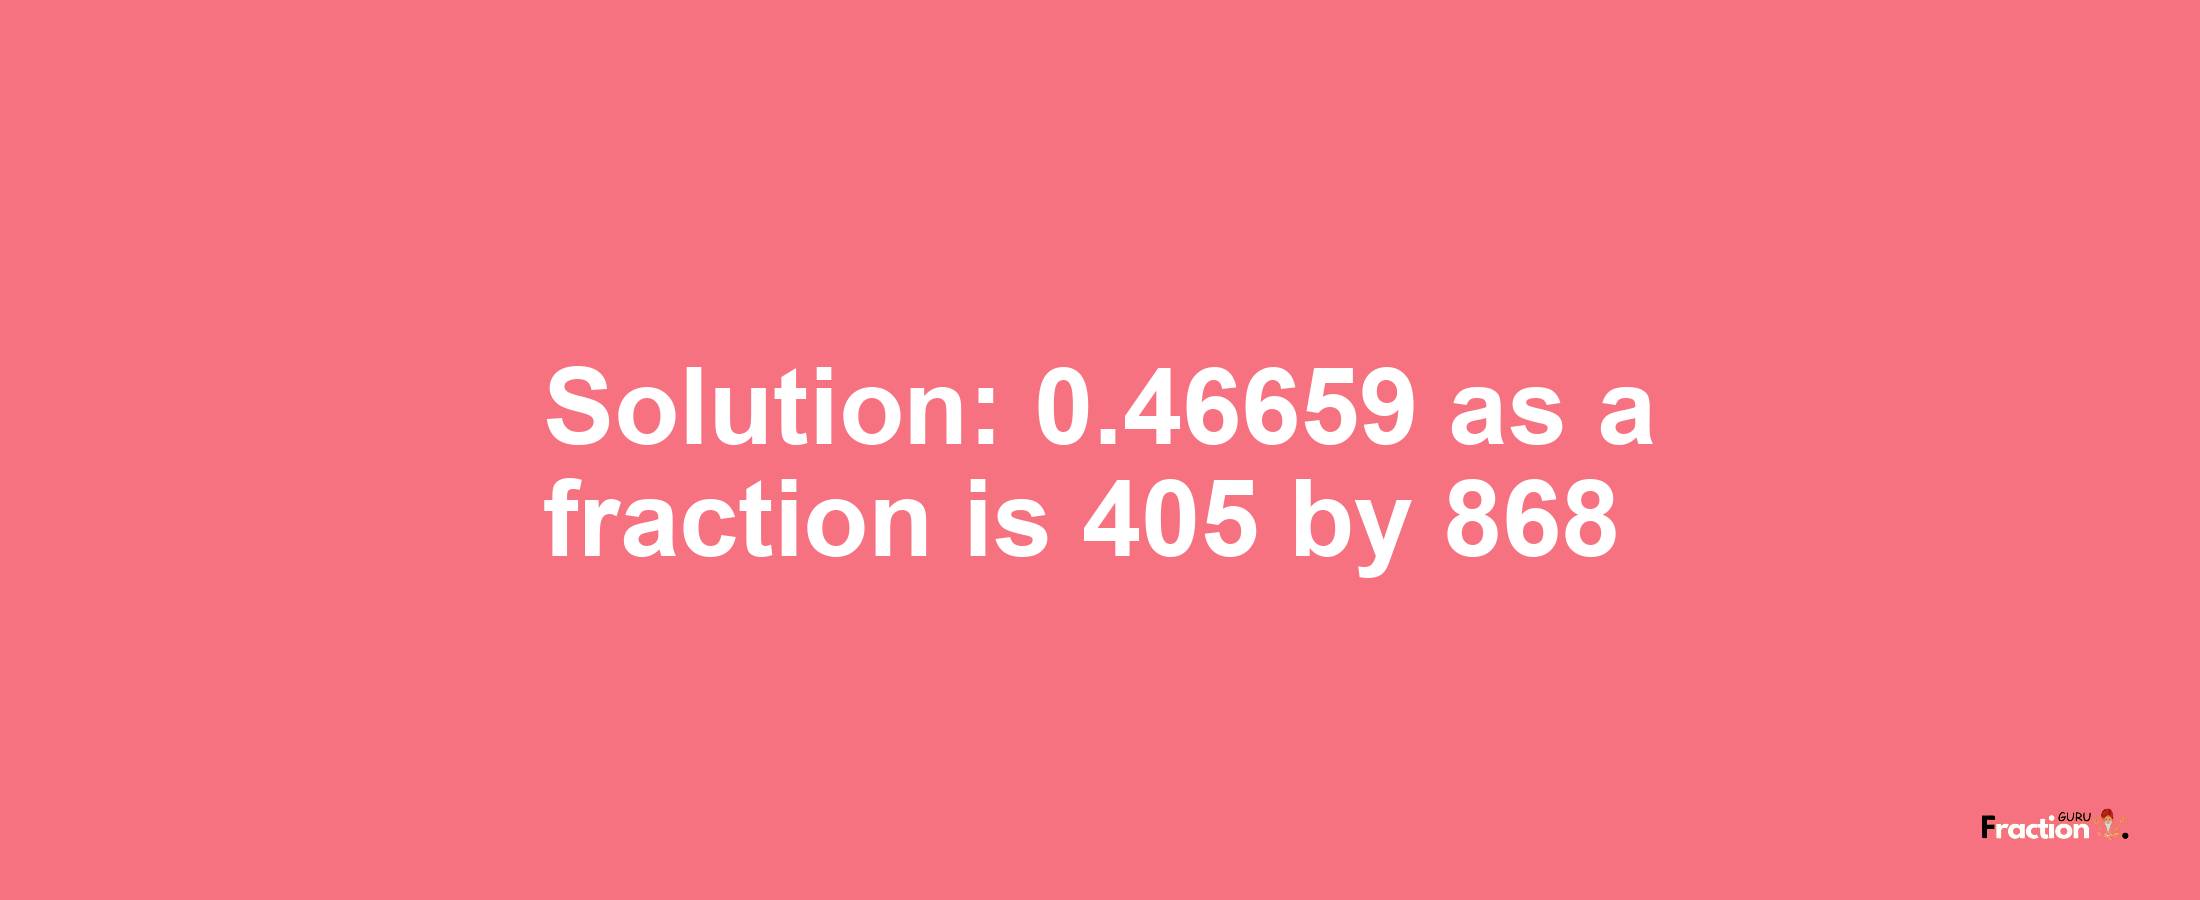 Solution:0.46659 as a fraction is 405/868